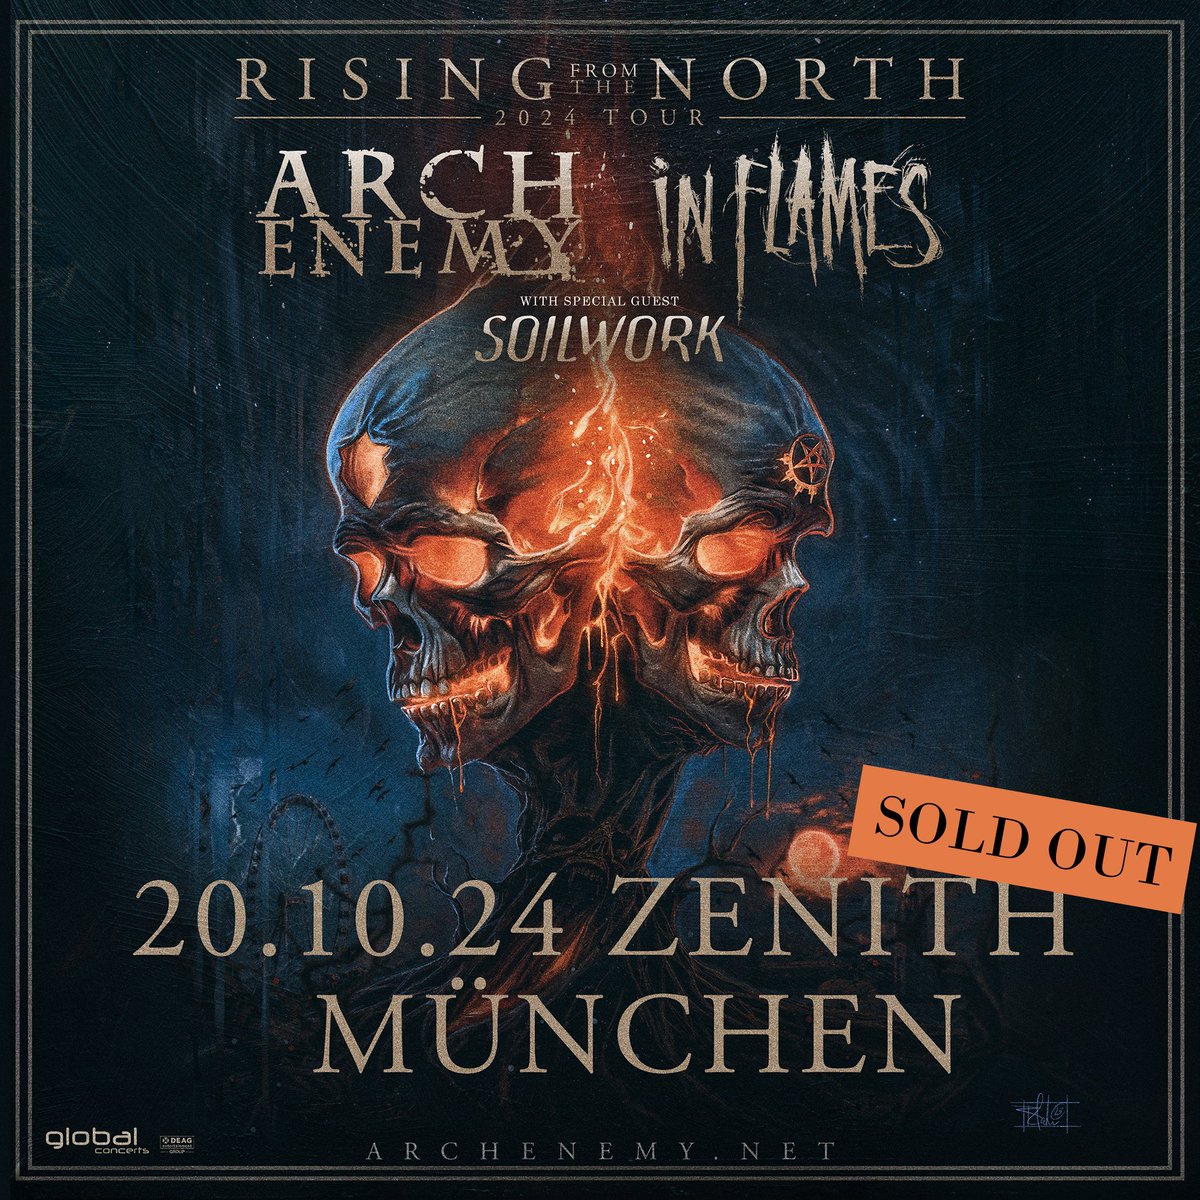 Tickets are selling fast for our upcoming European tour with @archenemymetal & @Soilwork! Have you gotten your tickets or VIP upgrades yet? Do it before it’s too late… More info at inflames.com